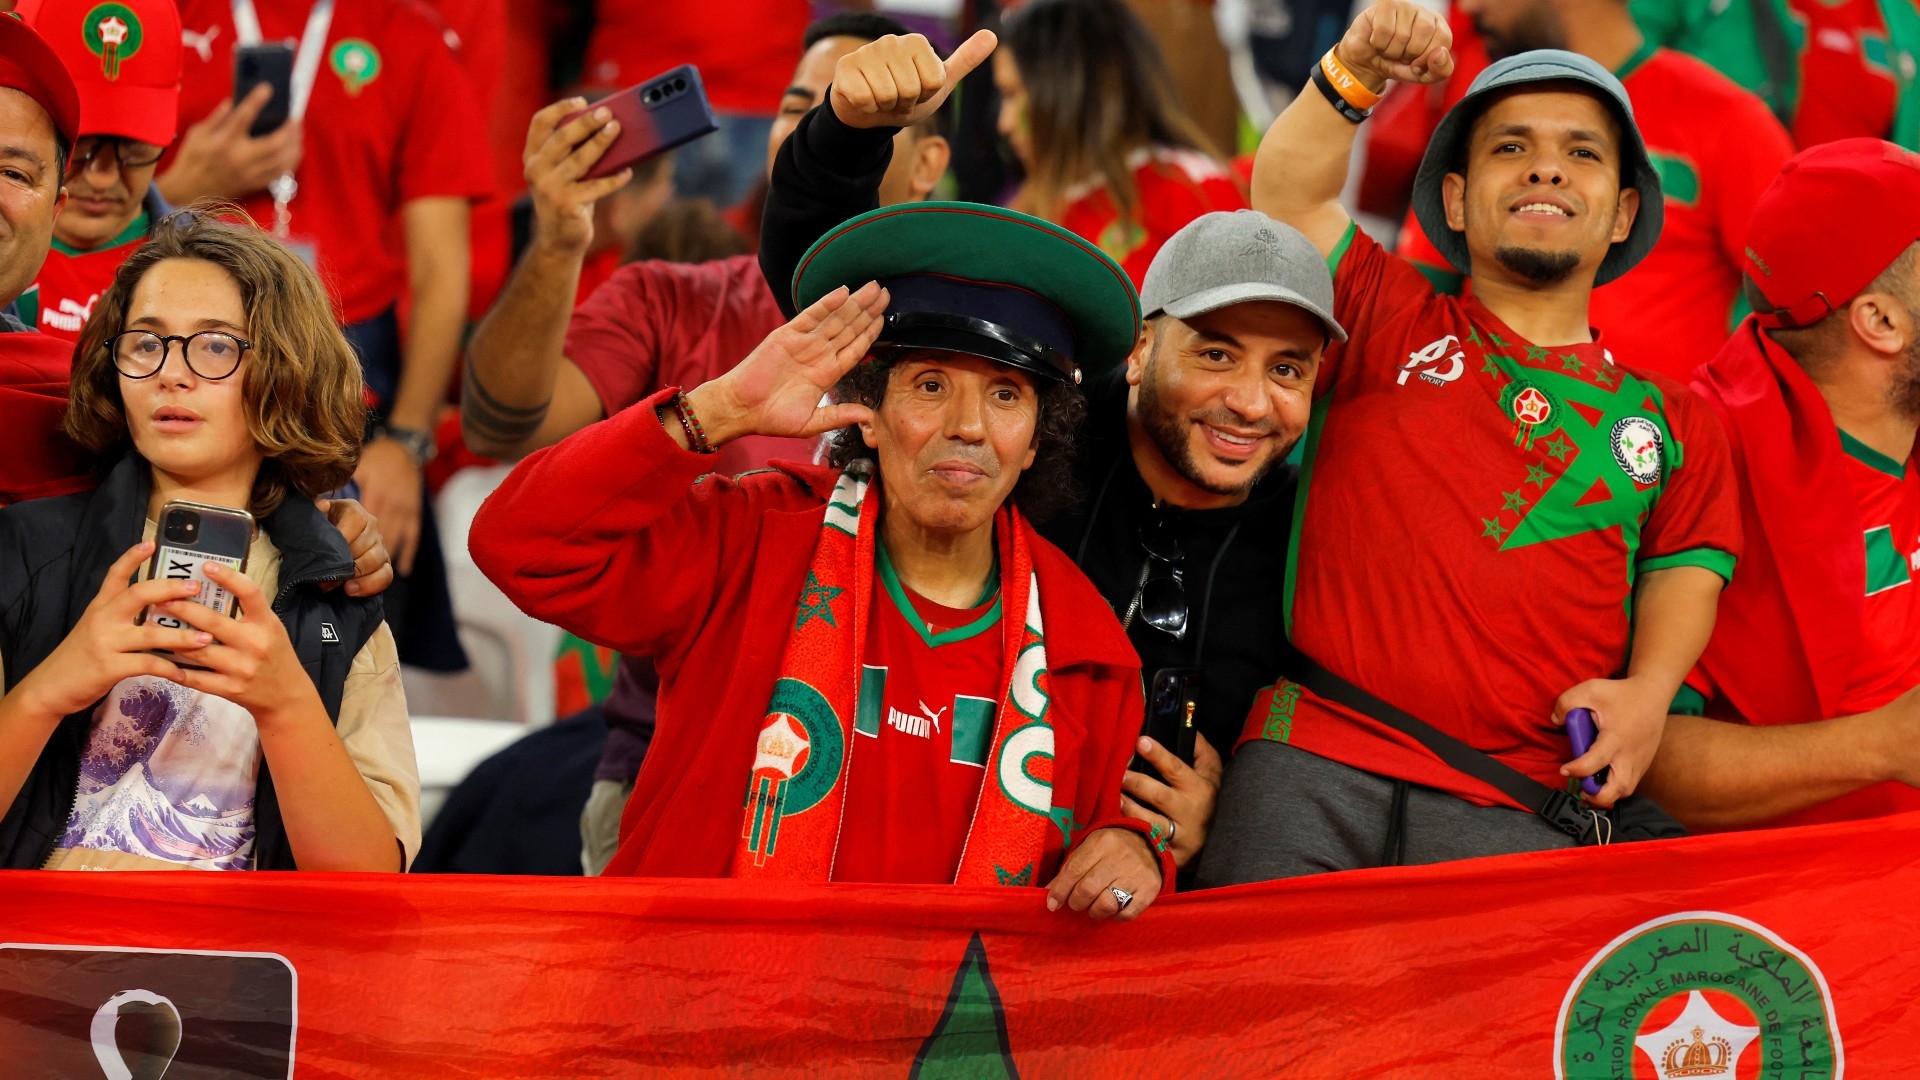 Morocco supporters cheer prior to the Qatar 2022 World Cup quarter-final football match against Portugal at Al-Thumama Stadium in Doha on 10 December 2022 (AFP)